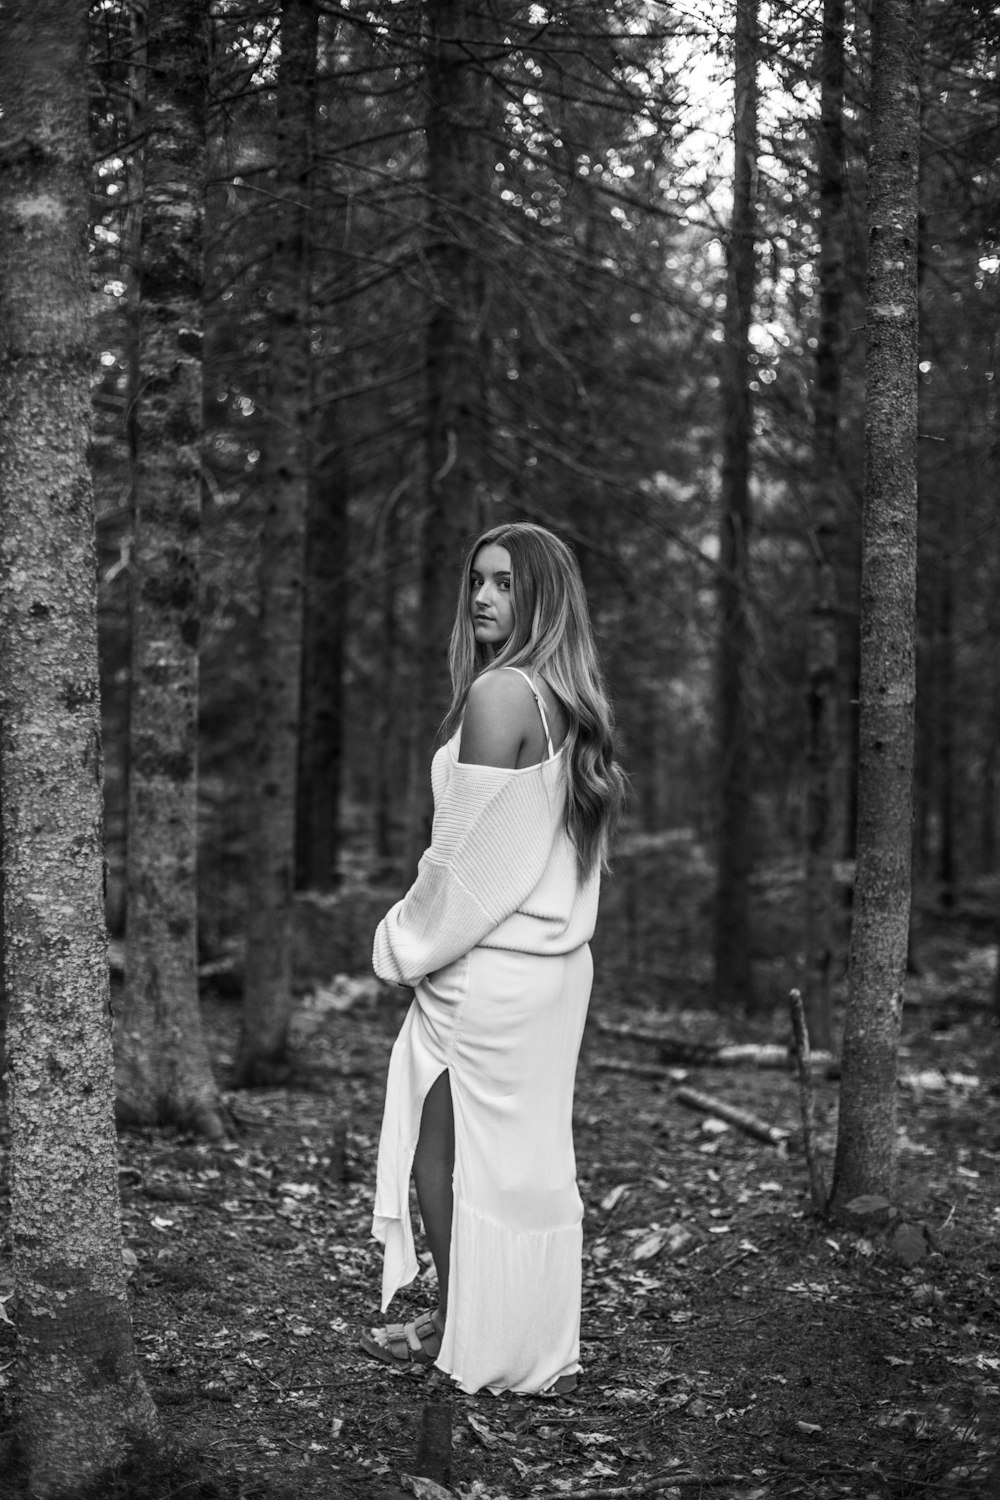 grayscale photo of woman in white long sleeve shirt and pants standing near trees